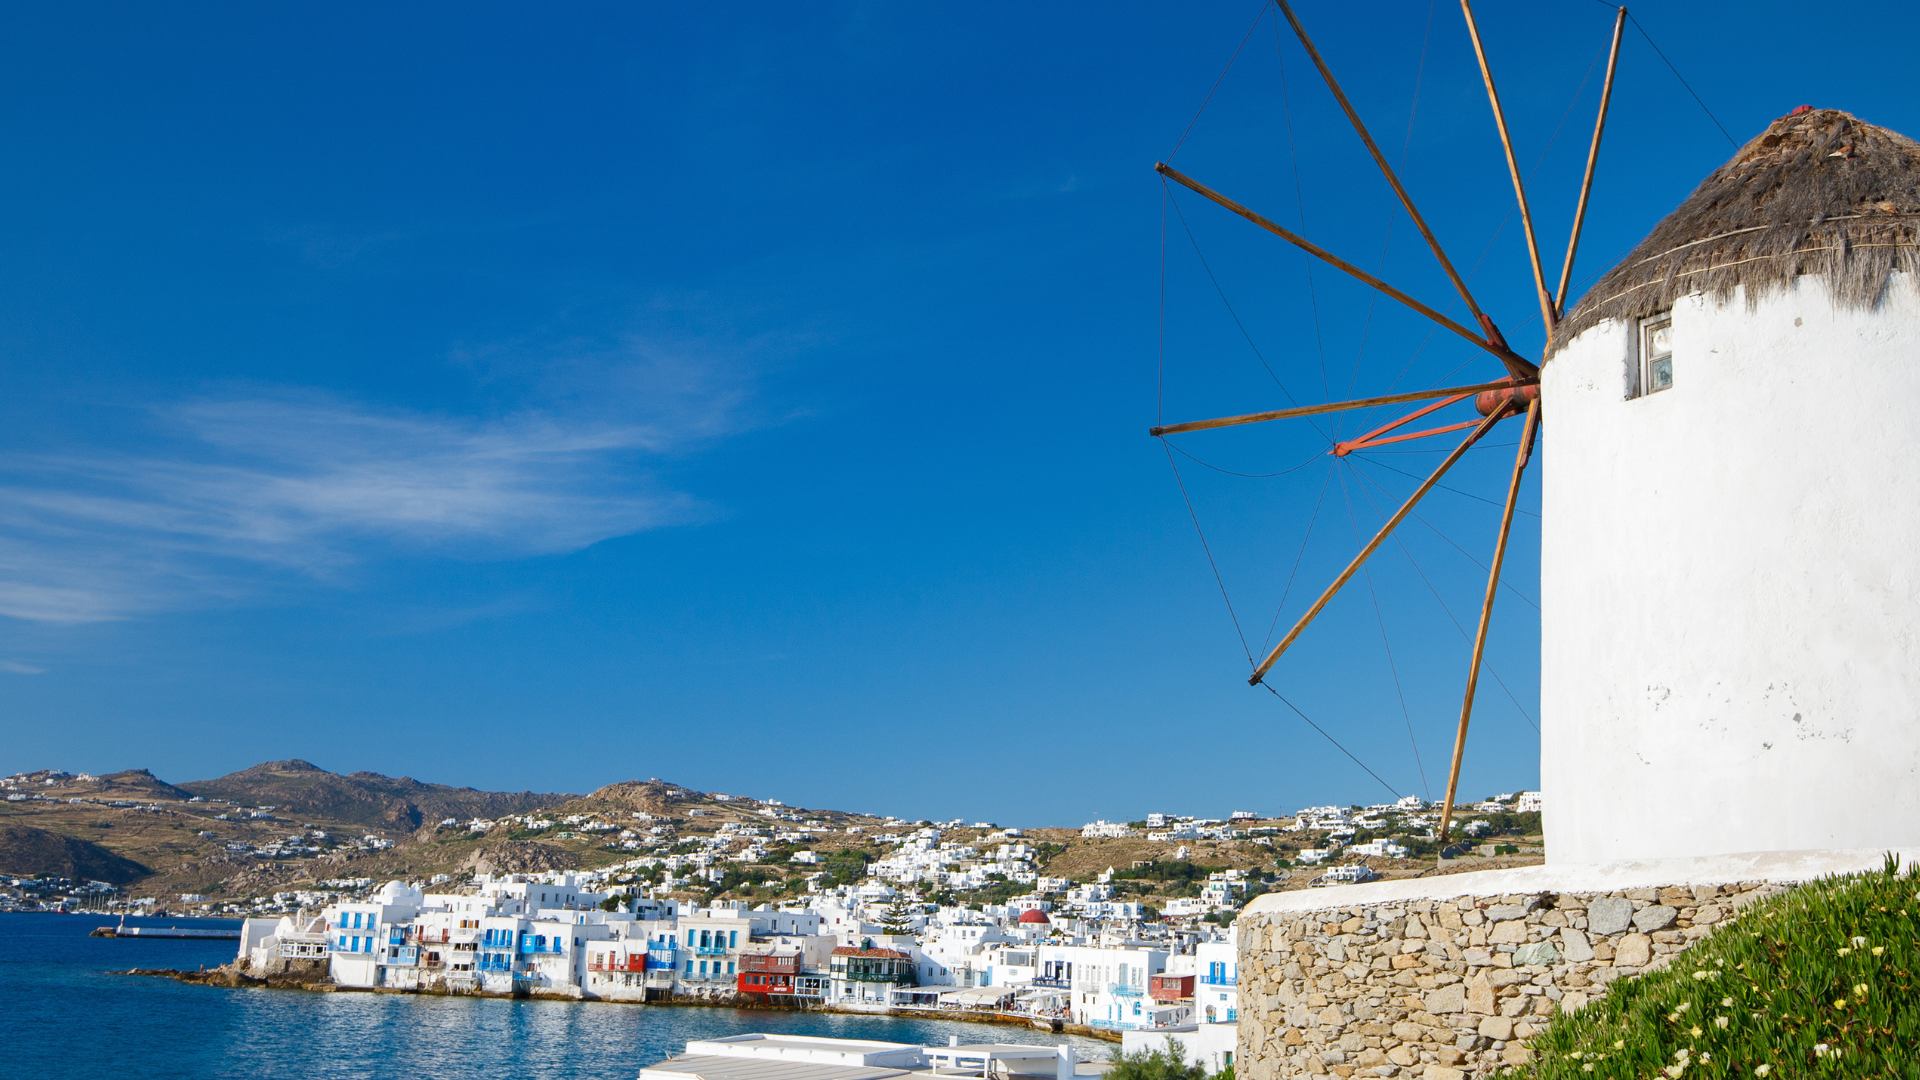 Sunrise hotel and suites Mykonos-Vivestia | Risk-Free Villas, Hotels and Cruises in VR